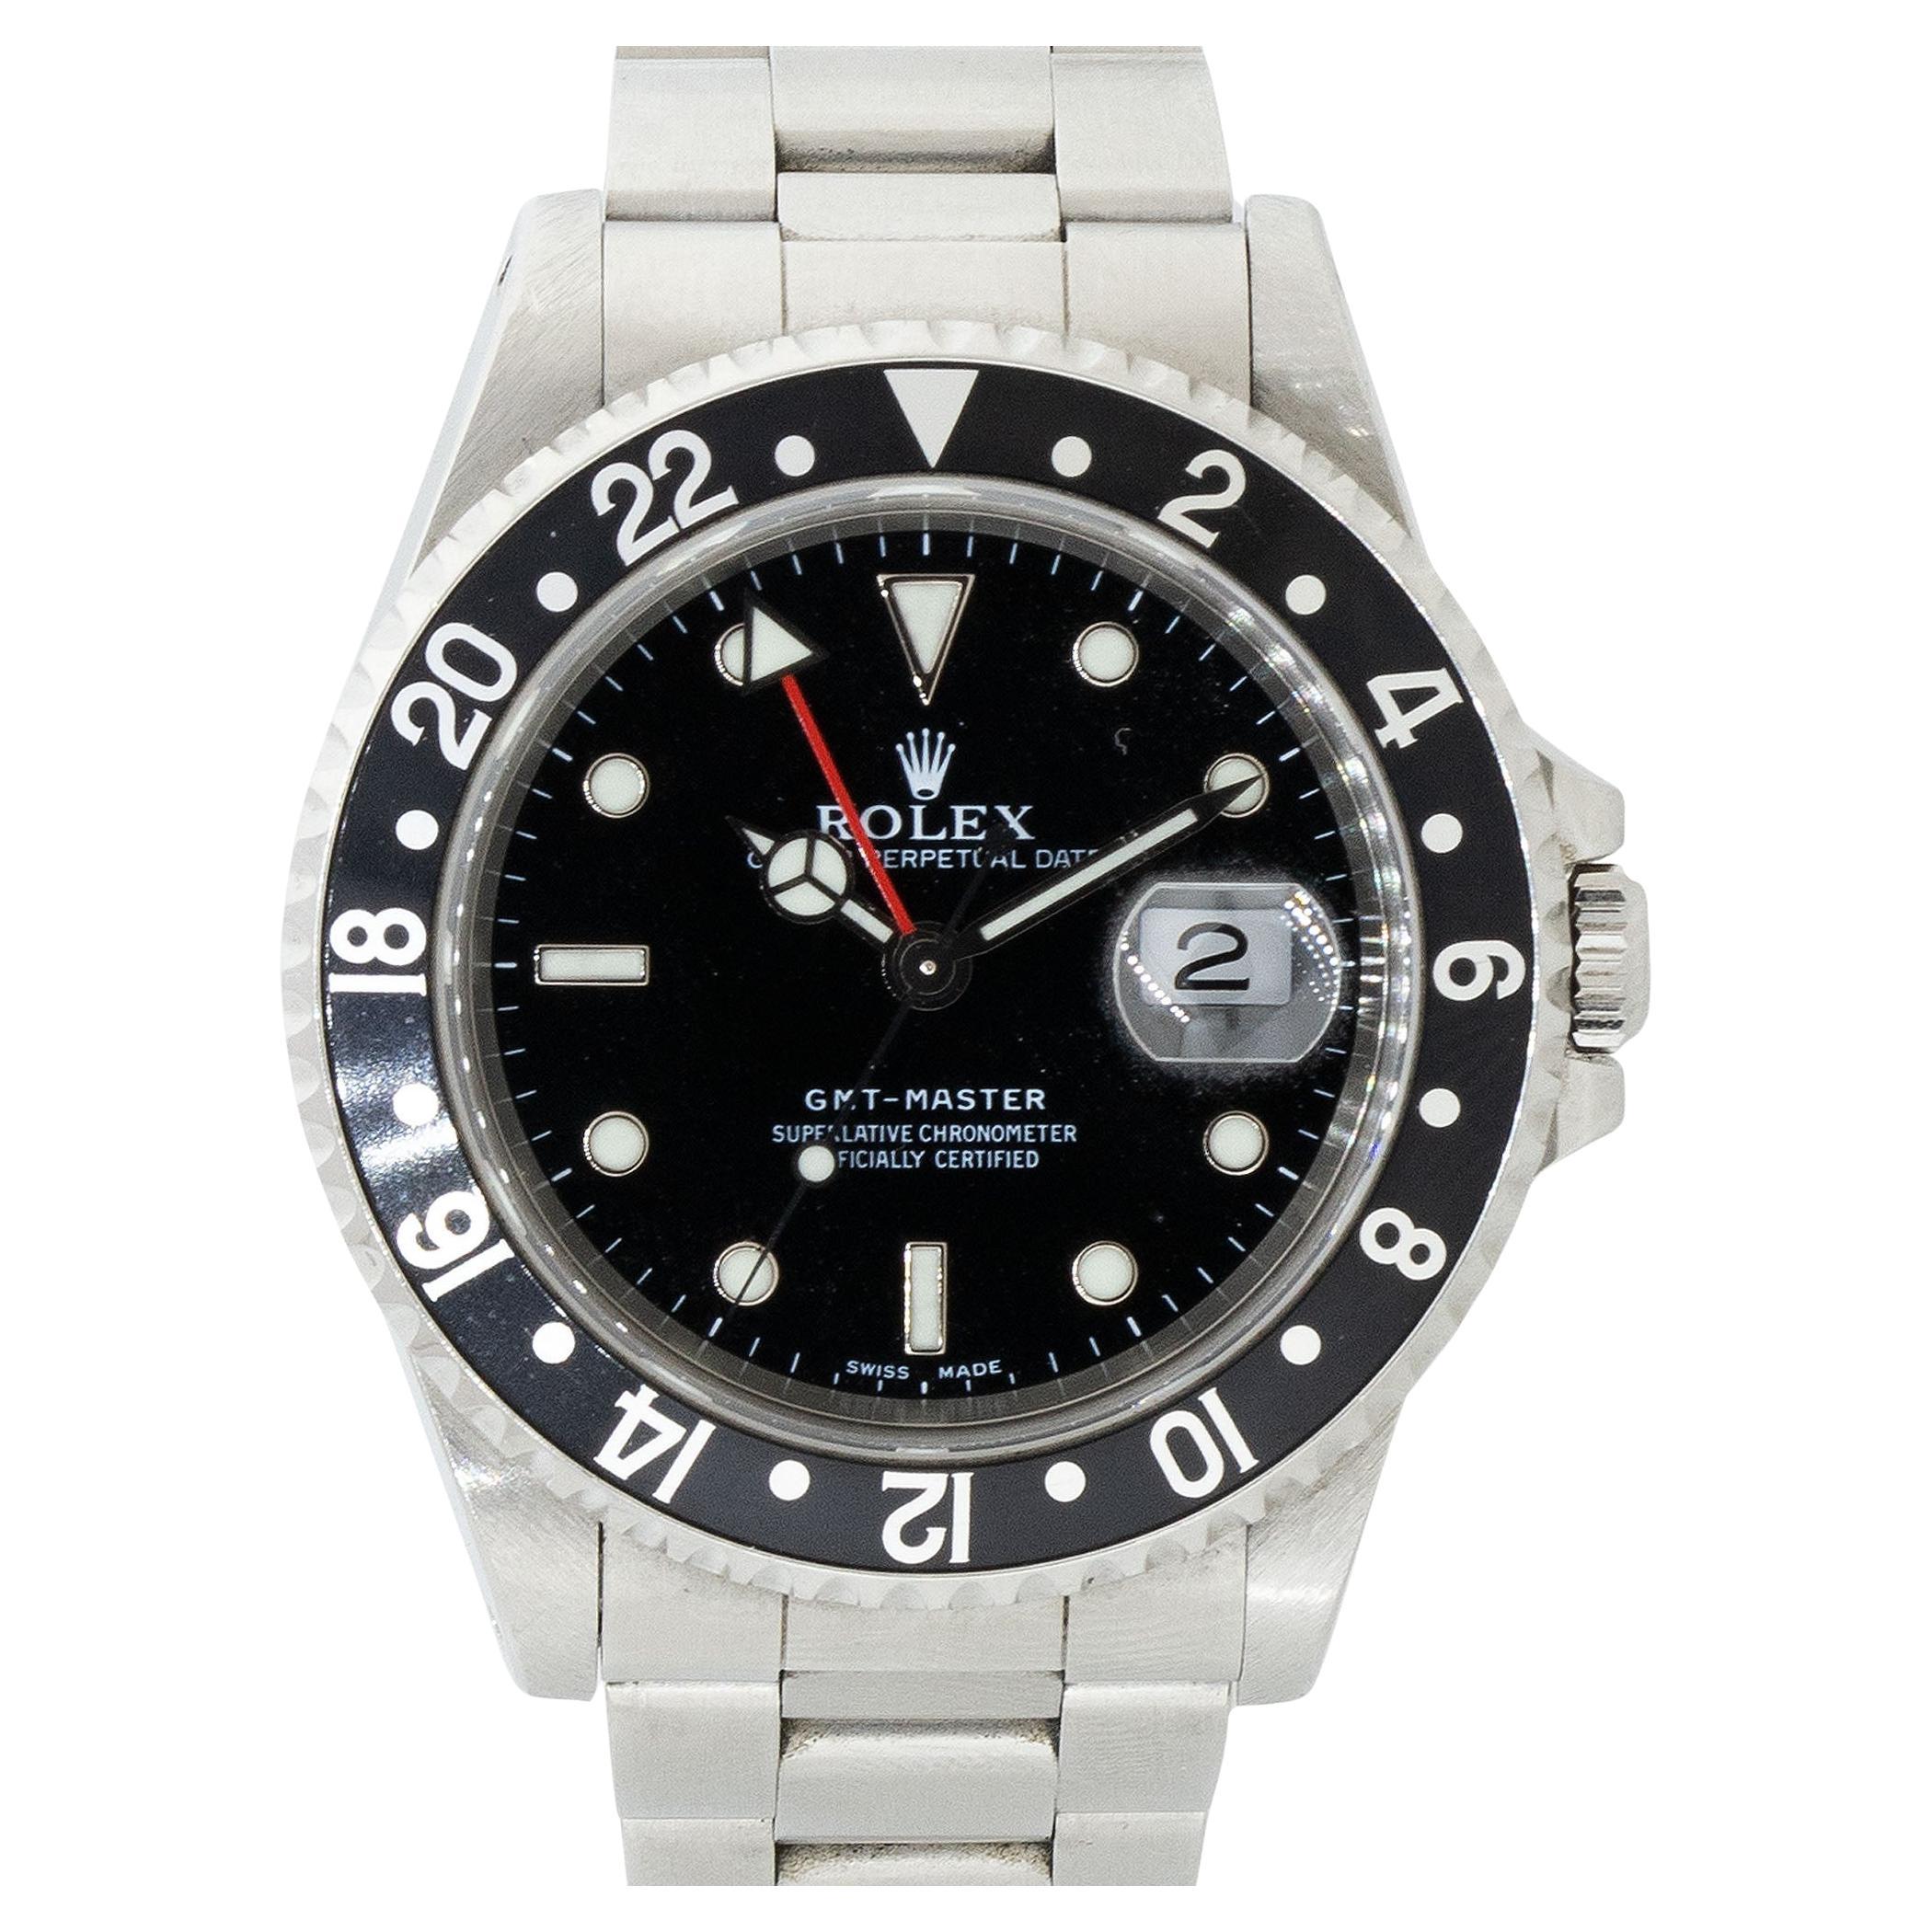 Rolex 16700 GMT-Master Stainless Steel Black Dial Watch